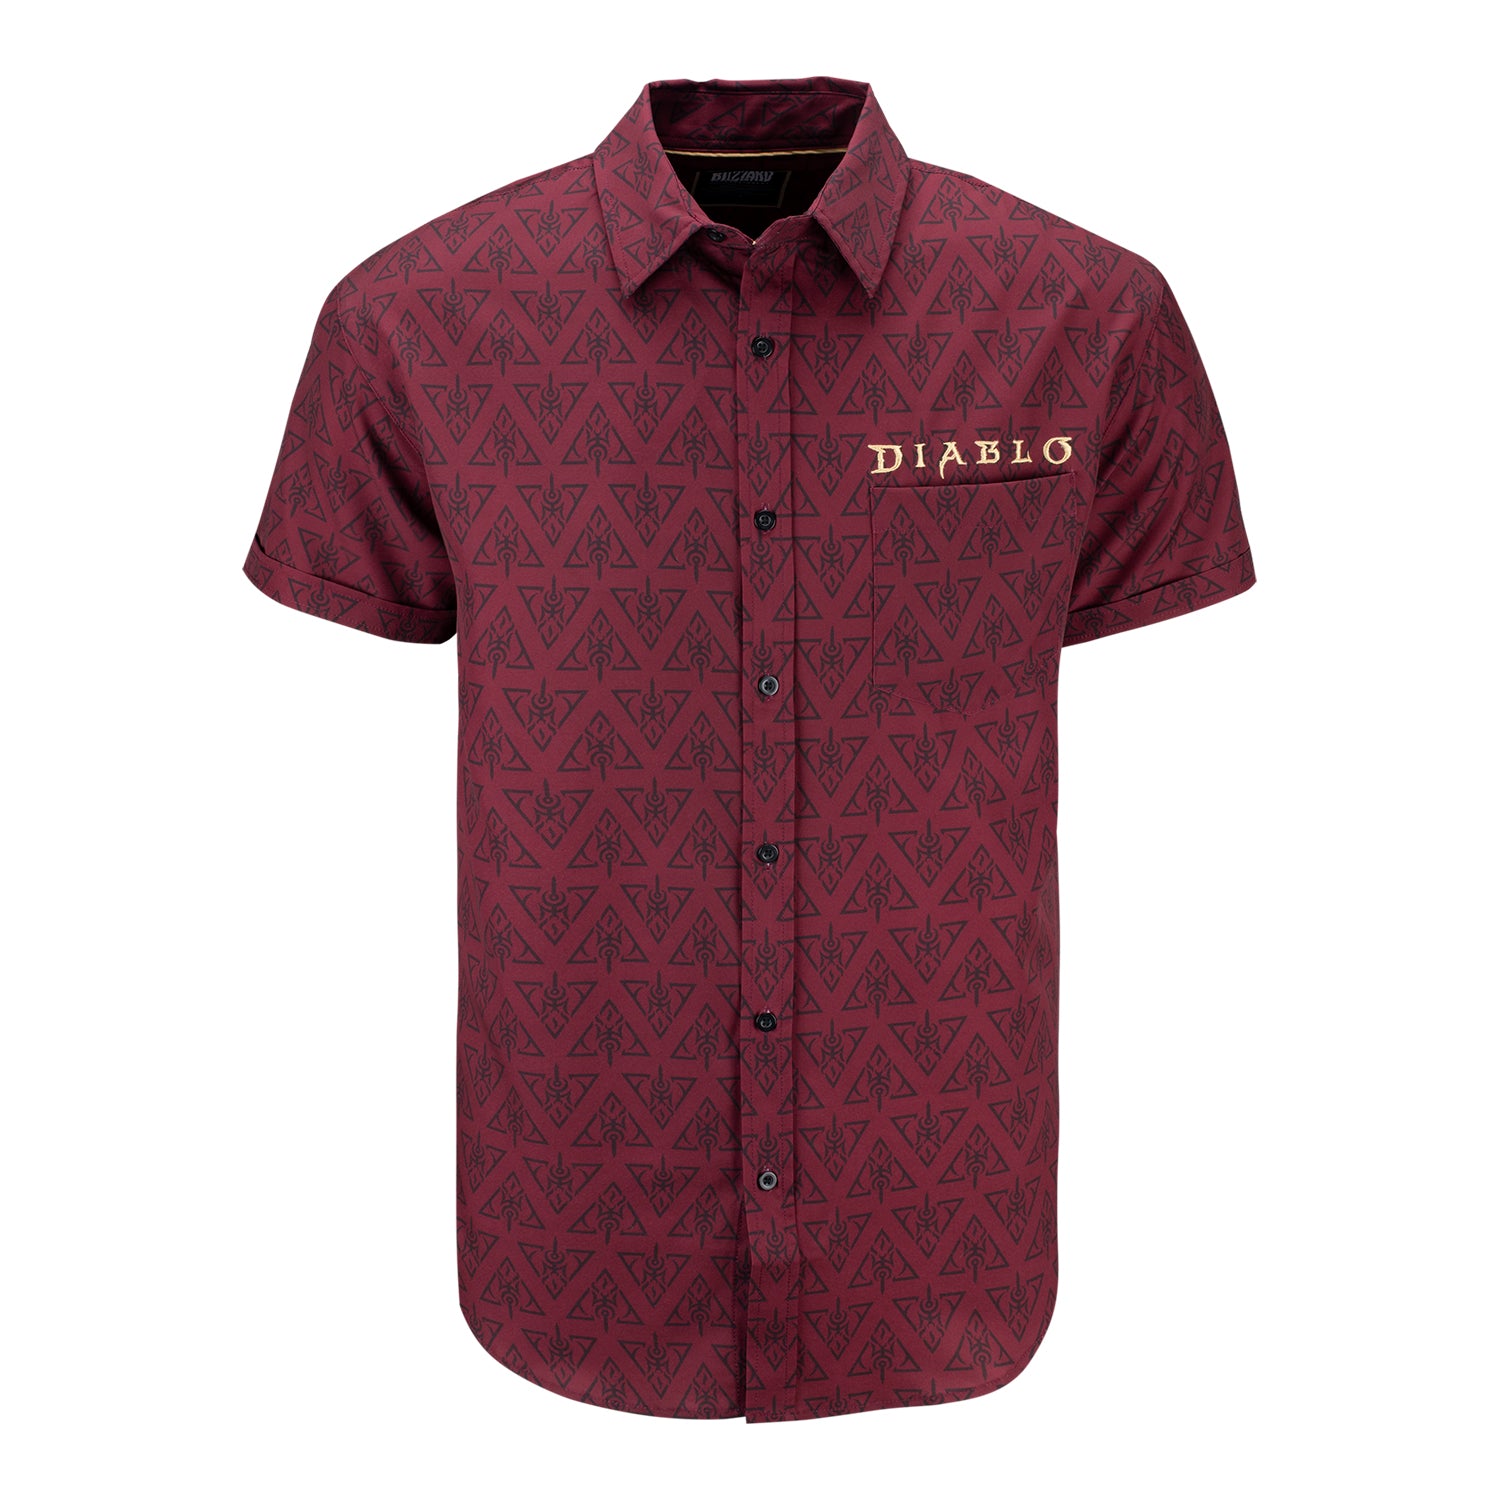 Diablo Button Up Red Shirt - Front View